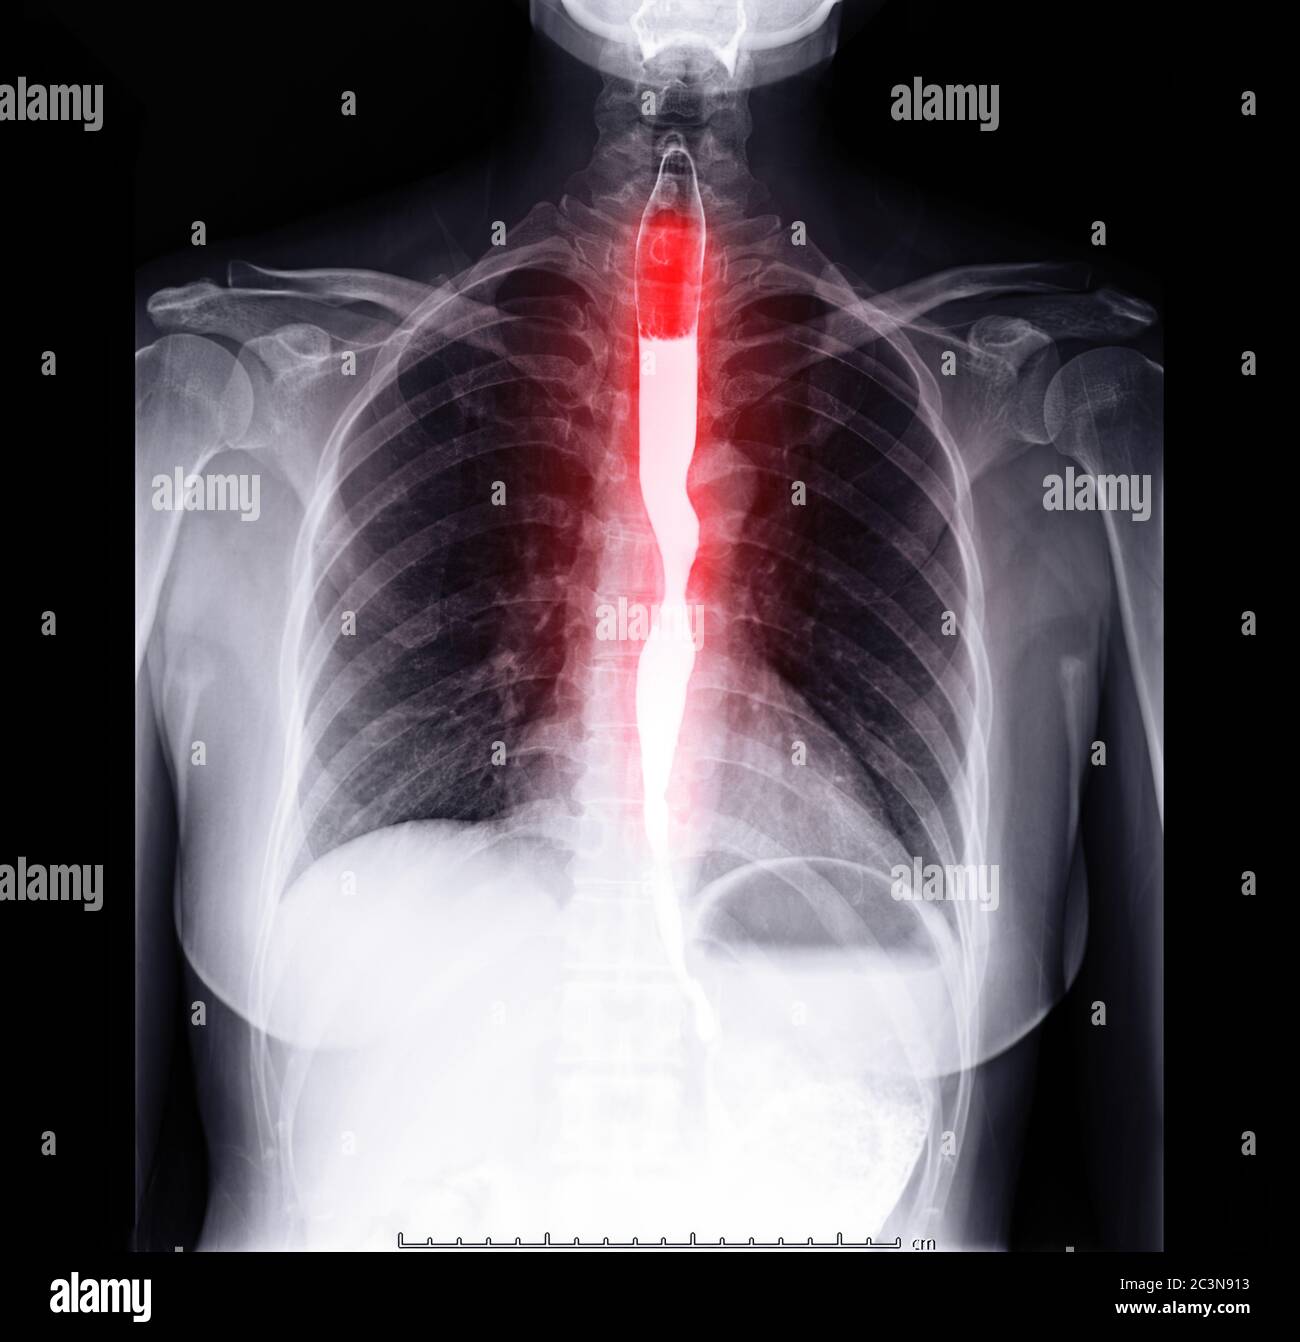 Esophagram or Barium swallow Front view  showing esophagus for diagnosis GERD or Gastroesophageal reflux disease Stock Photo